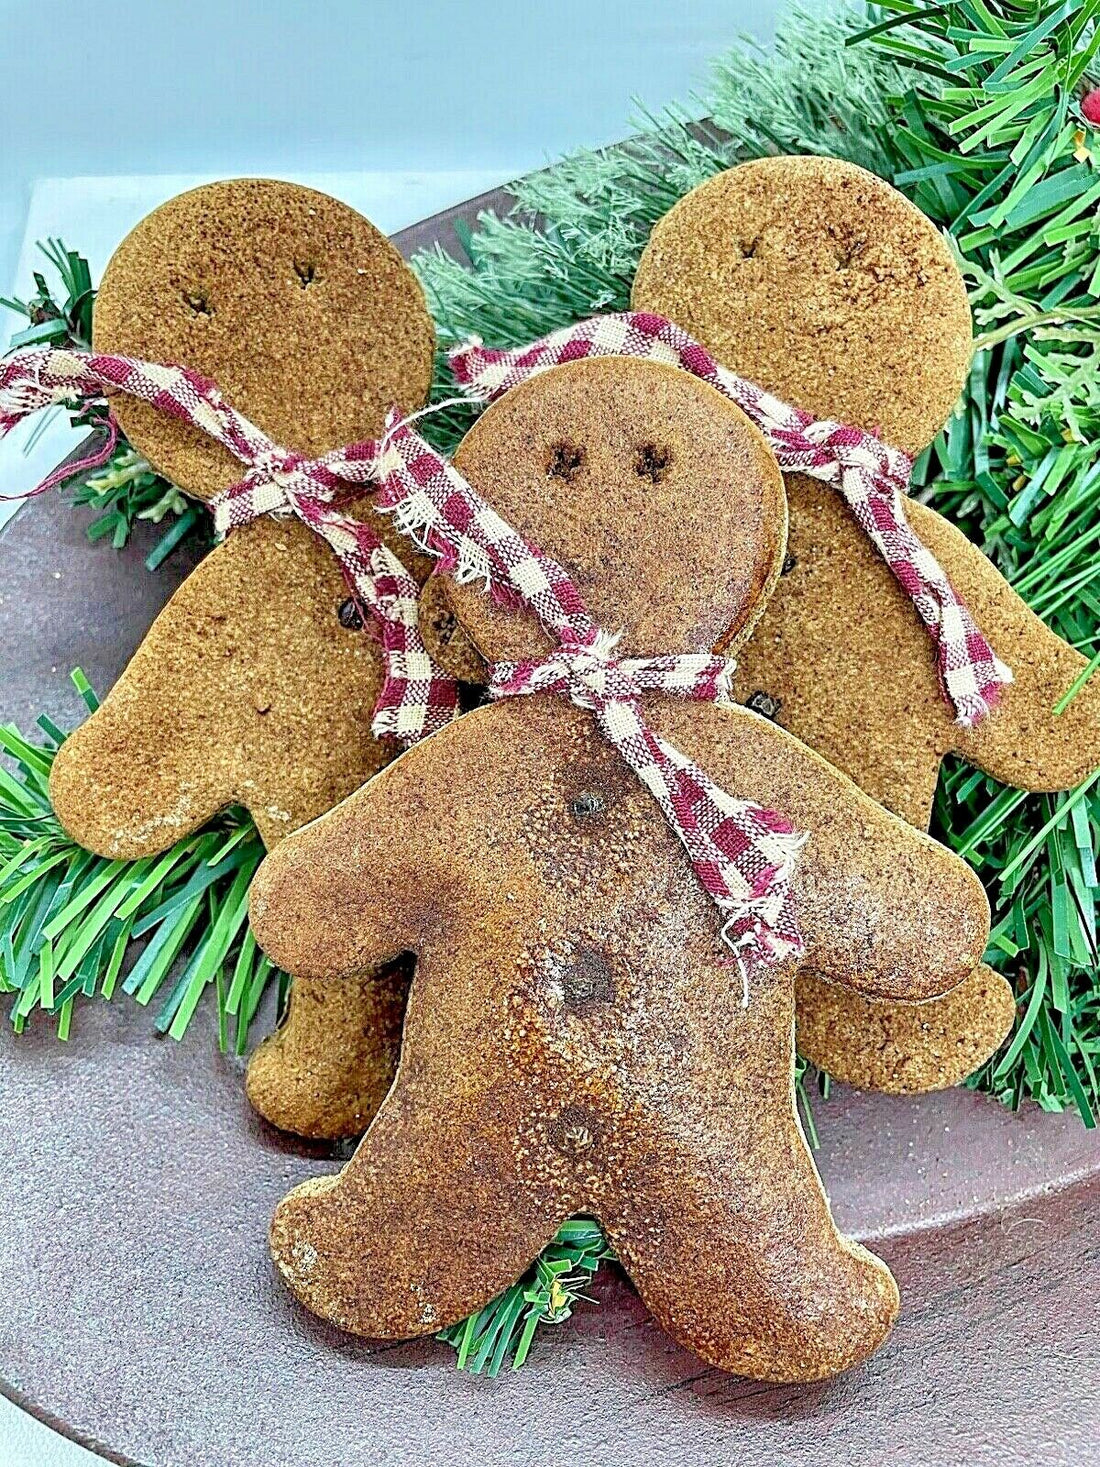 Primitive Colonial Christmas 3 pc Gingerbread Men w/ Homespun Fabric Bowl Filler - The Primitive Pineapple Collection